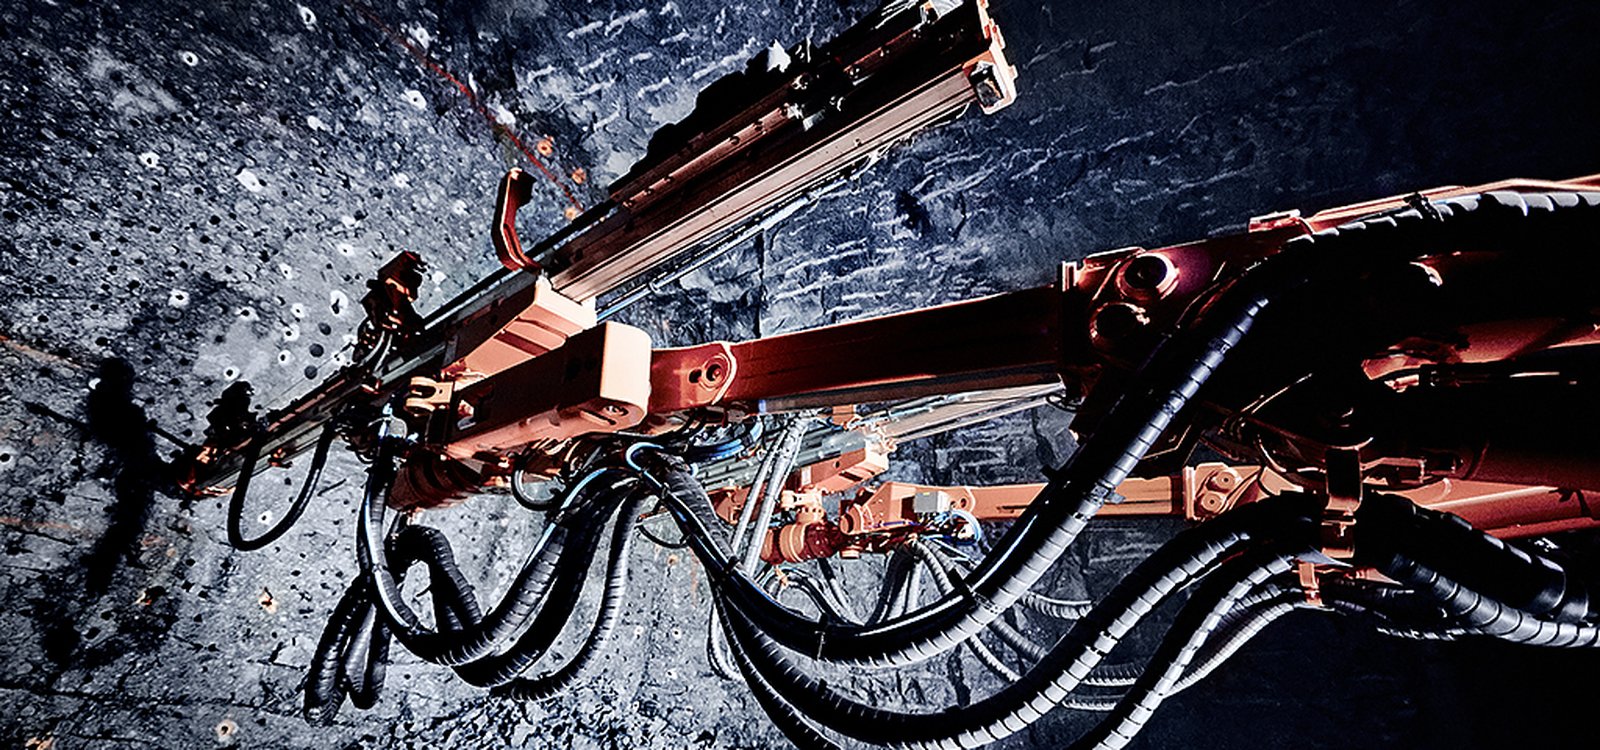 The rig’s drilling and boom control system for the first time introduces torque-based drilling control in the Sandvik mining jumbo fleet.